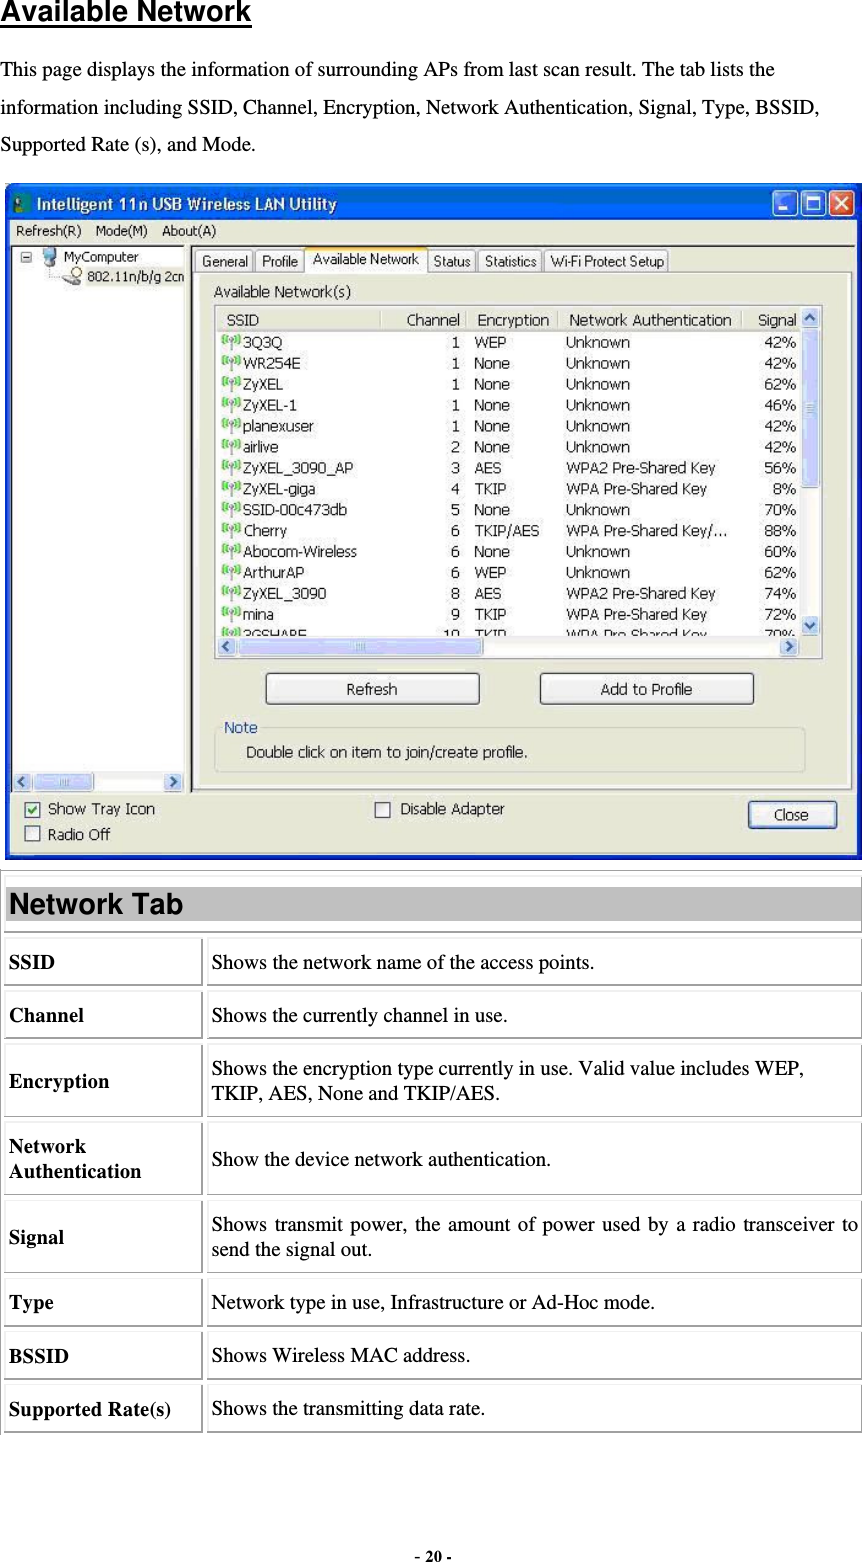  - 20 - Available Network This page displays the information of surrounding APs from last scan result. The tab lists the information including SSID, Channel, Encryption, Network Authentication, Signal, Type, BSSID, Supported Rate (s), and Mode.  Network Tab SSID  Shows the network name of the access points. Channel  Shows the currently channel in use. Encryption  Shows the encryption type currently in use. Valid value includes WEP, TKIP, AES, None and TKIP/AES. Network Authentication  Show the device network authentication. Signal  Shows transmit power, the amount of power used by a radio transceiver to send the signal out. Type Network type in use, Infrastructure or Ad-Hoc mode. BSSID  Shows Wireless MAC address. Supported Rate(s)  Shows the transmitting data rate. 